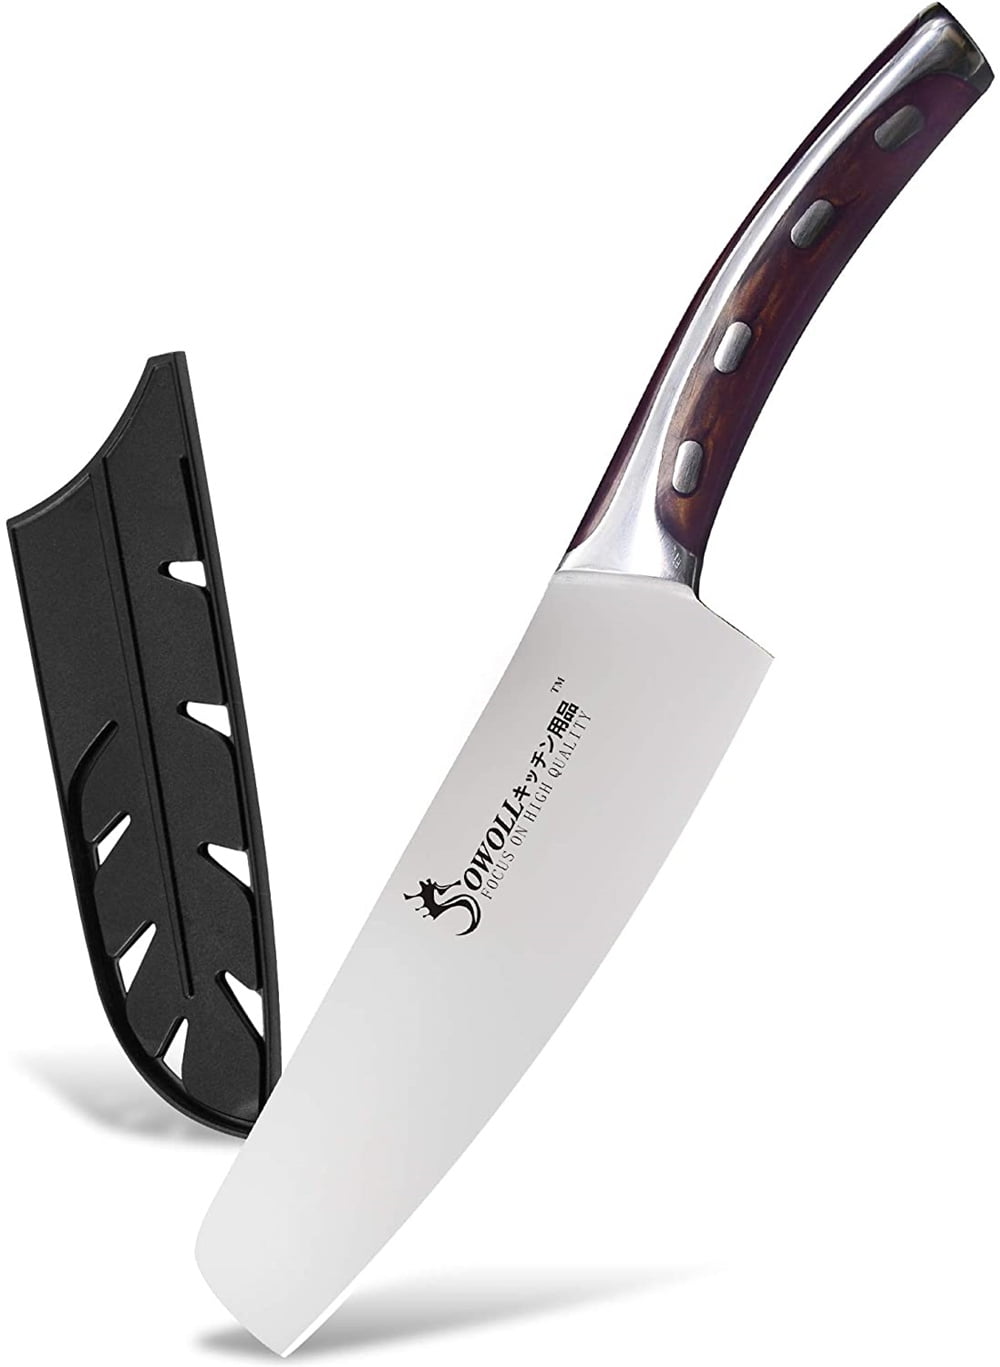 CUOCO Chef Knife Set 3 Pieces Black, Ultra Sharp Knife Set without Block,  with 8” Chef Knife, 7” Santoku Knife, and 5” Utility Knife, Cooking Gifts